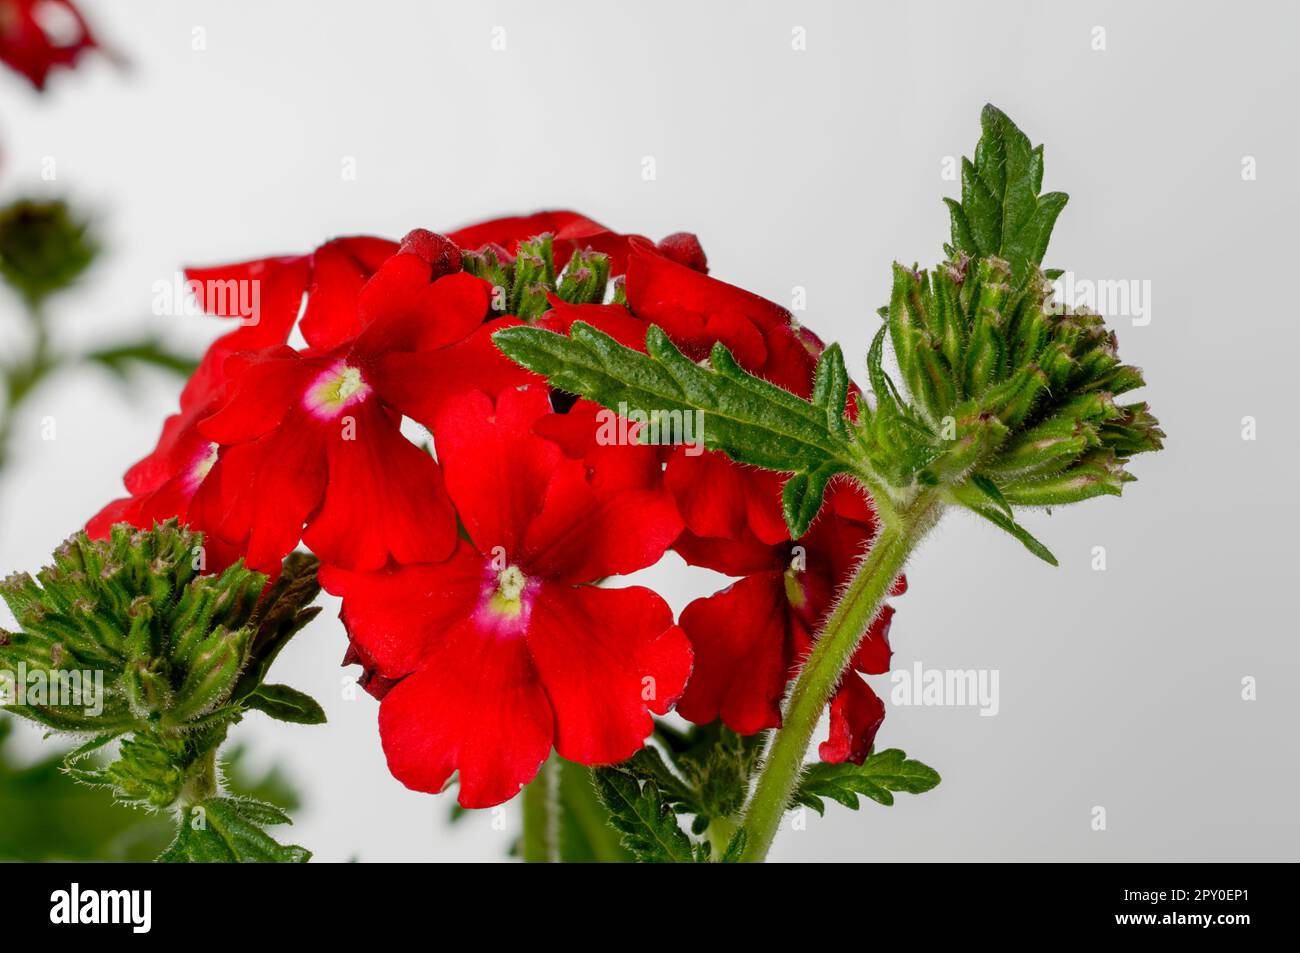 Garden verbena (Verbena hybrida), red flowers of a popular ornamental plant, flowers in full bloom close-up on a light background Stock Photo